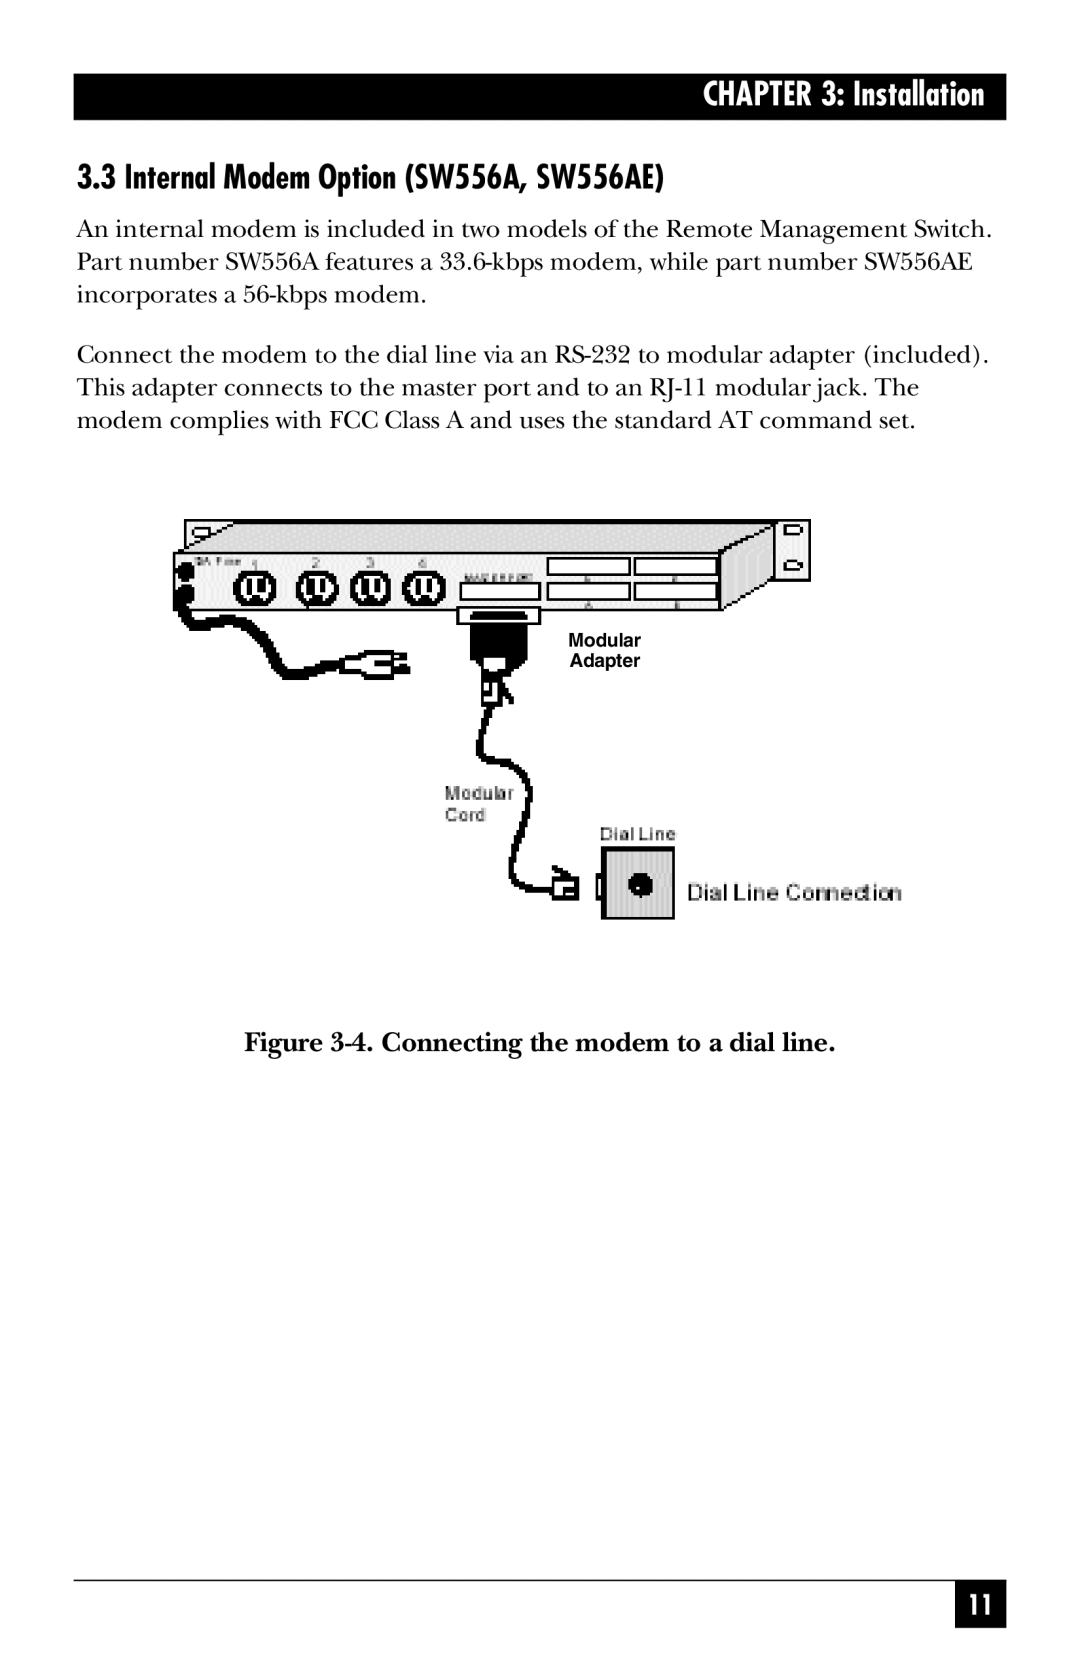 Black Box SW555AE manual Internal Modem Option SW556A, SW556AE, 4.Connecting the modem to a dial line, Installation 